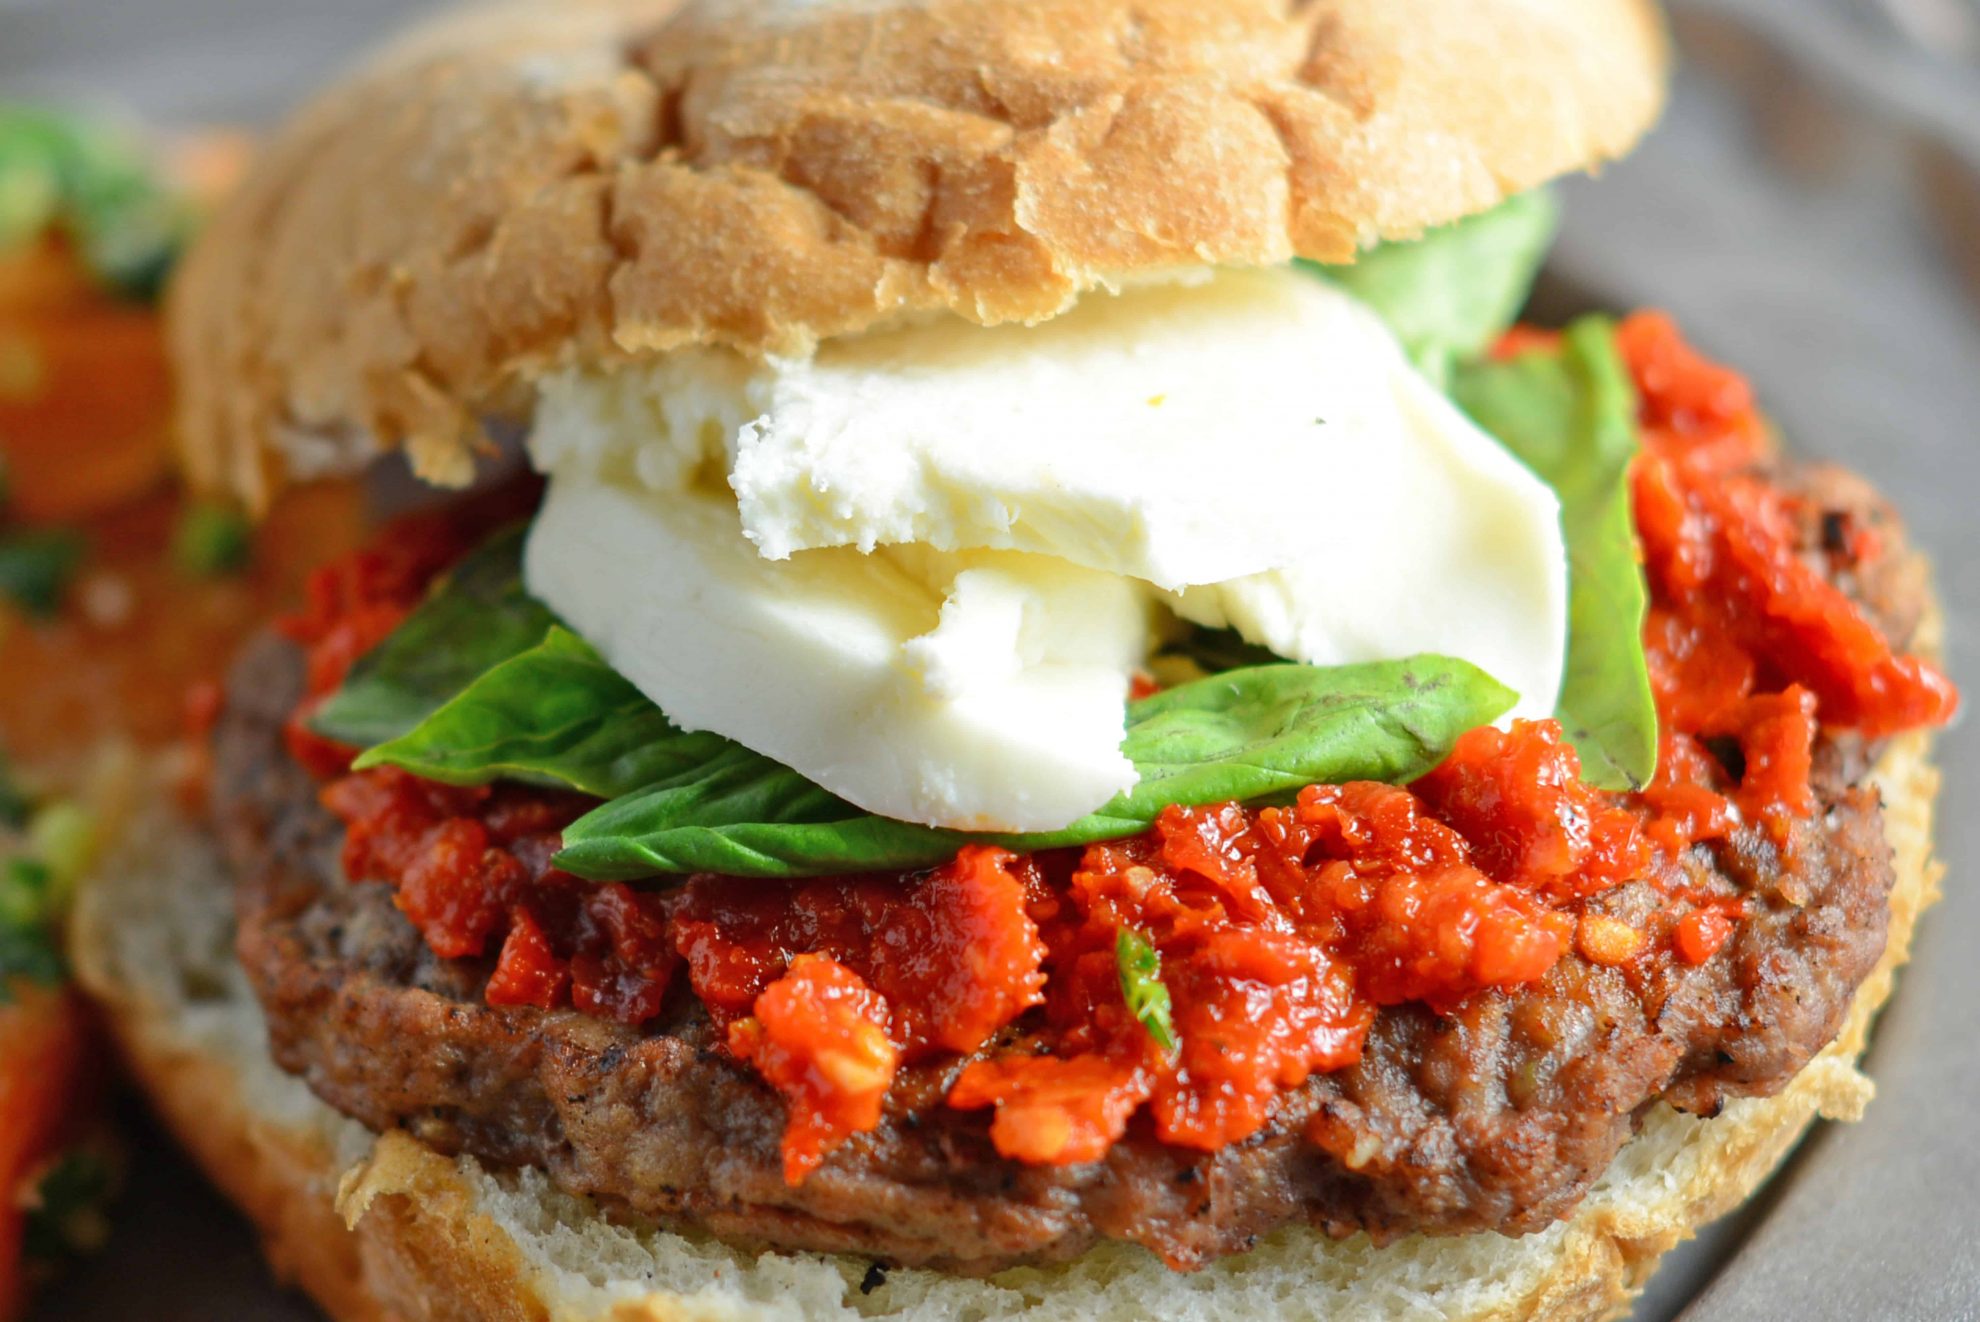 Caprese Burgers are smothered with a red pesto, fresh mozzarella and basil all on a flame-grilled burger. The best gourmet burger out there! #capreseburgers #gourmetburgers www.savoryexperiments.com